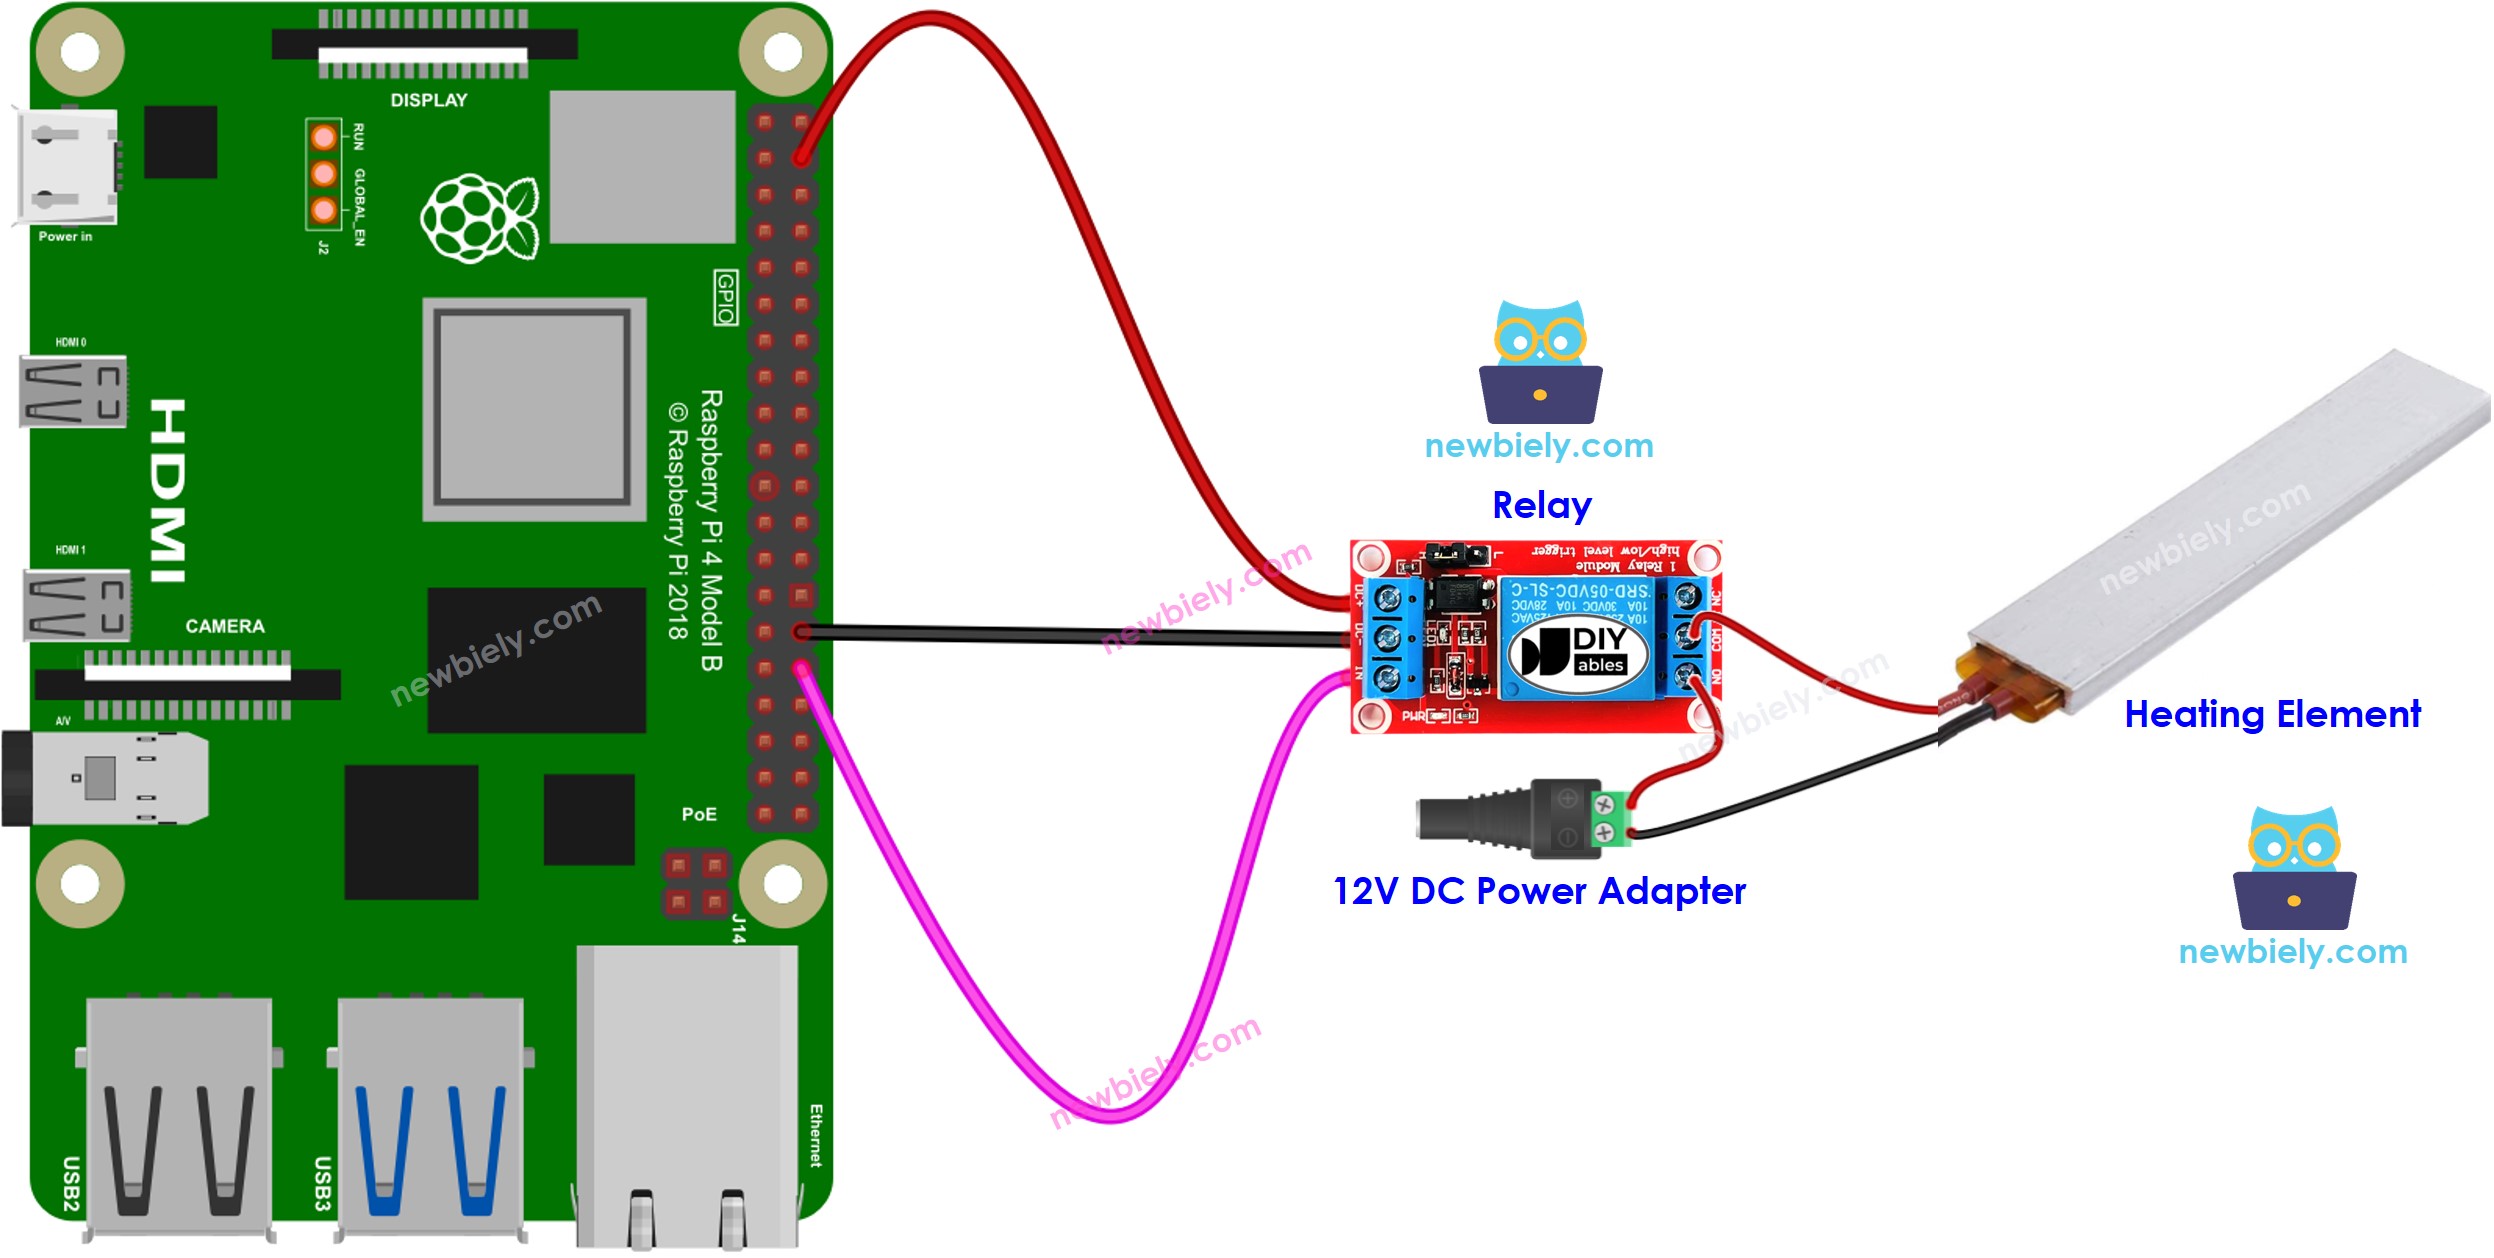 The wiring diagram between Raspberry Pi and heating element